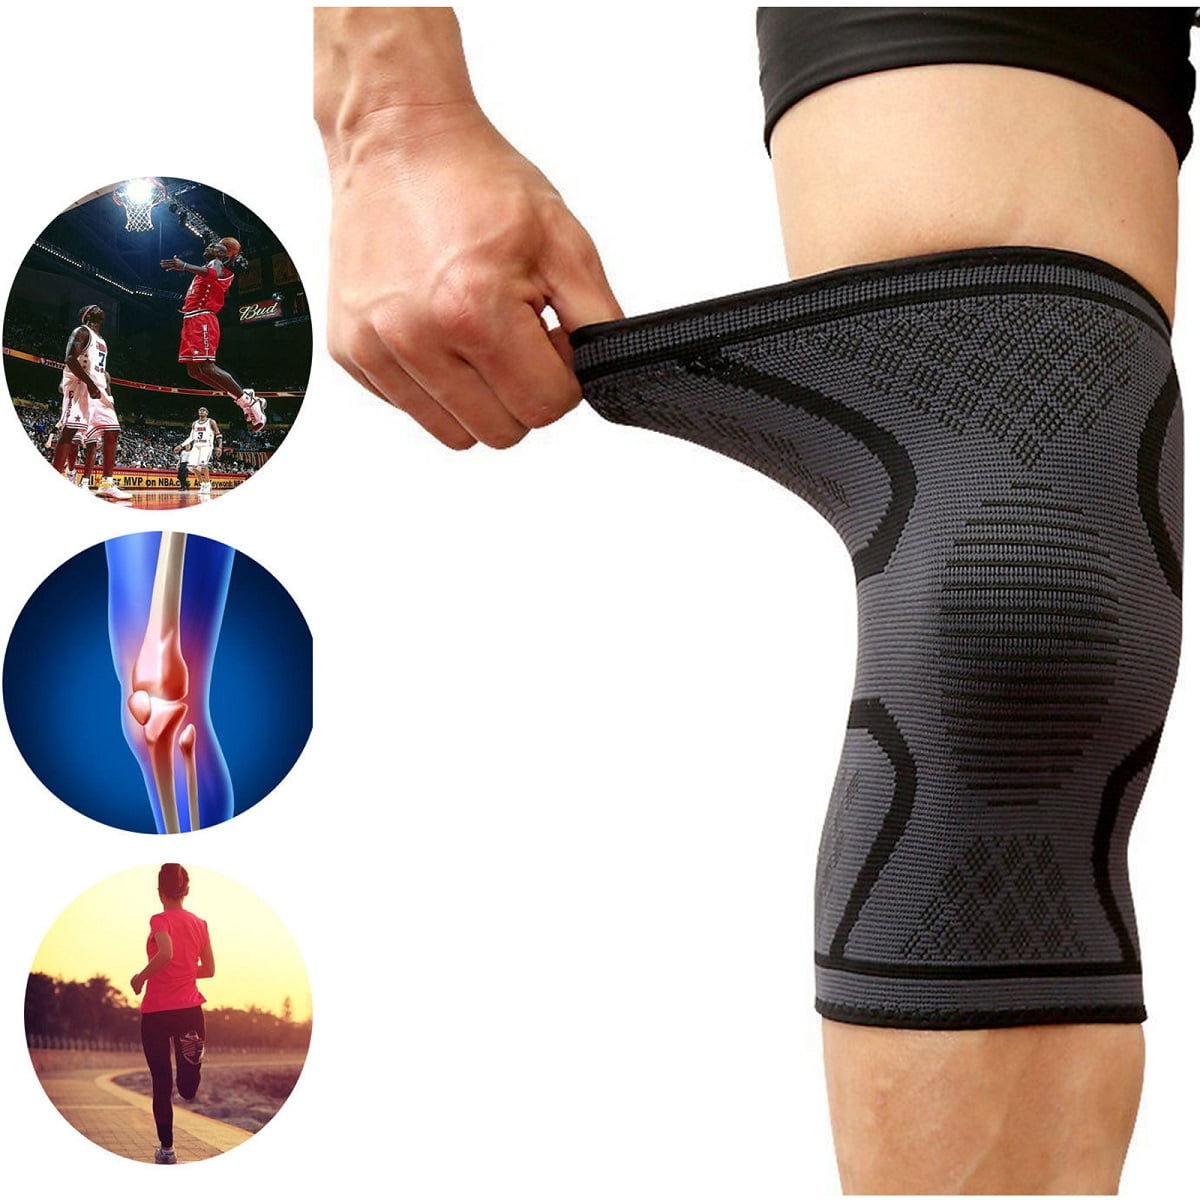 ACL - Ultra Flexible MV-112 Stabilizer for Arthritis and Knee Pain Relief Modvel Compression Knee Sleeve Great for All Athletics Comfortable Knee Brace for Men and Women 1 Pair Volleyball L 